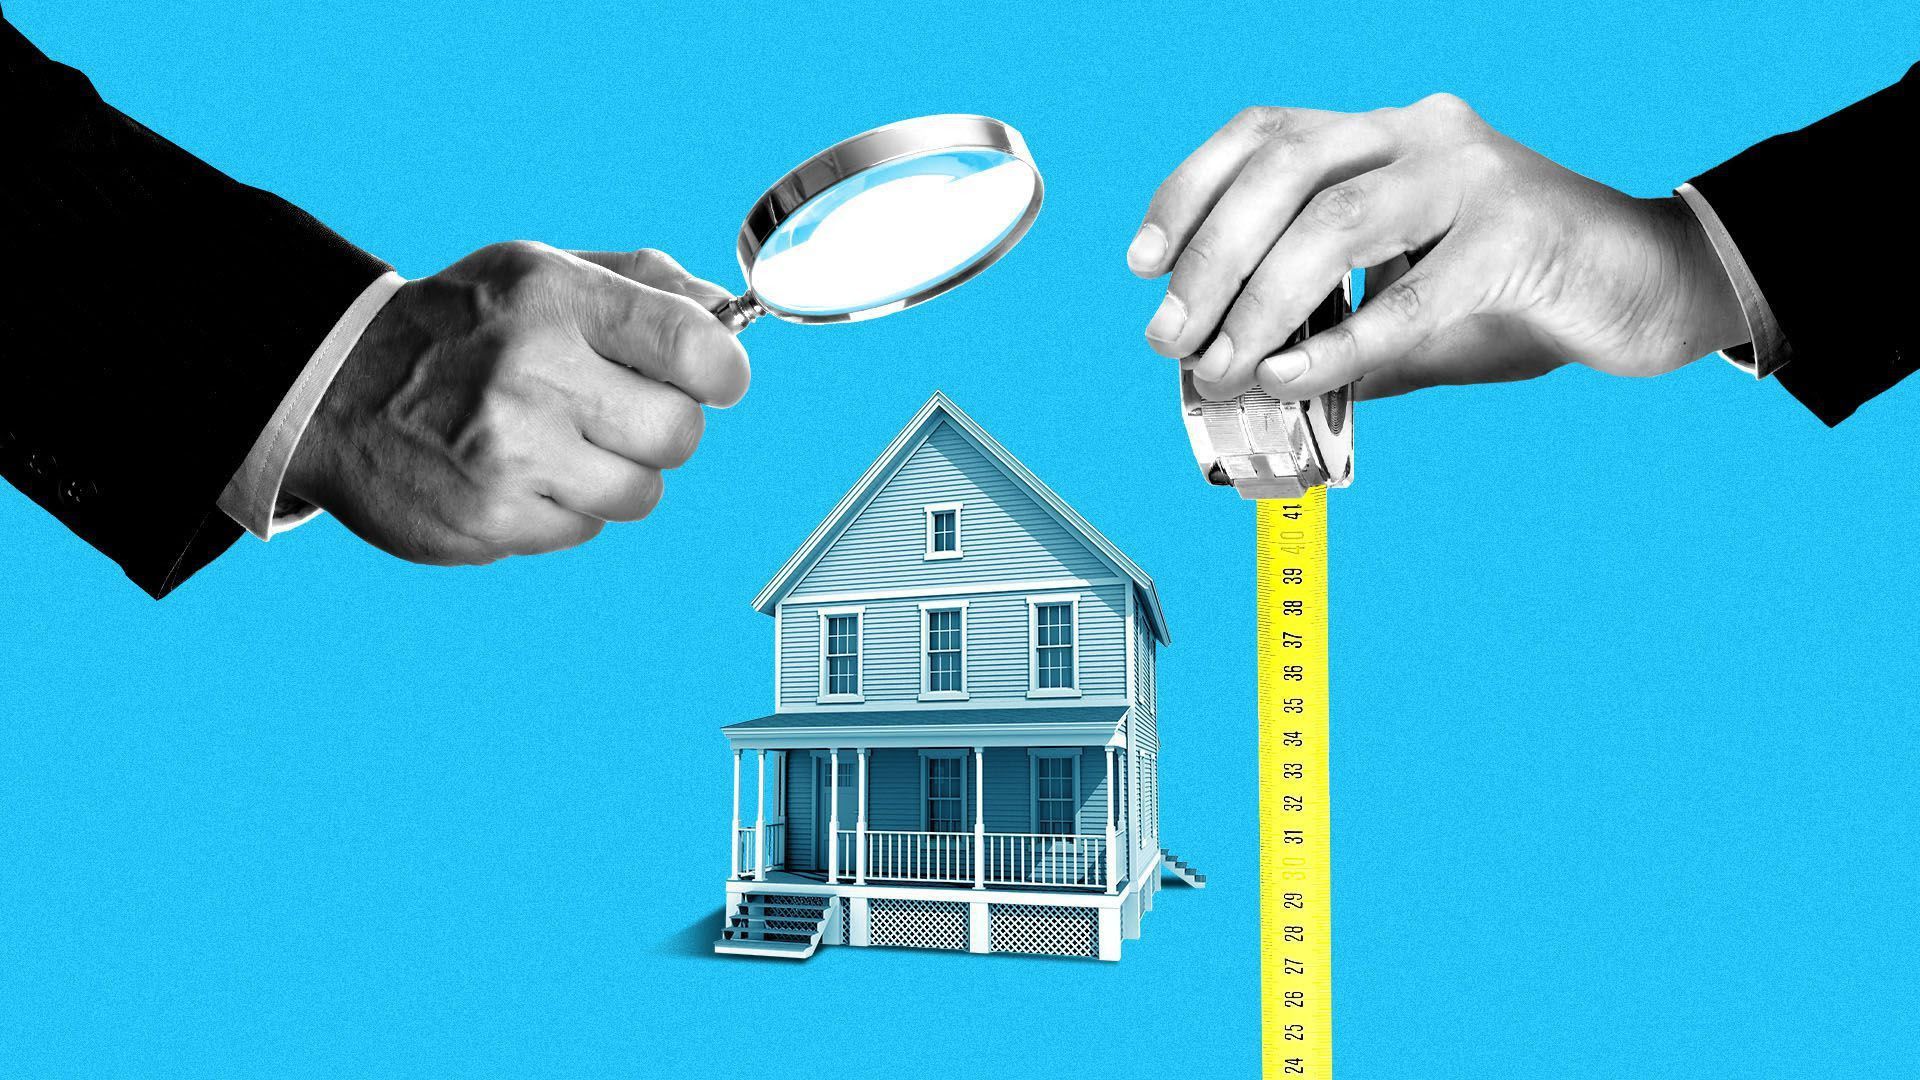 An illustration of a house being measured